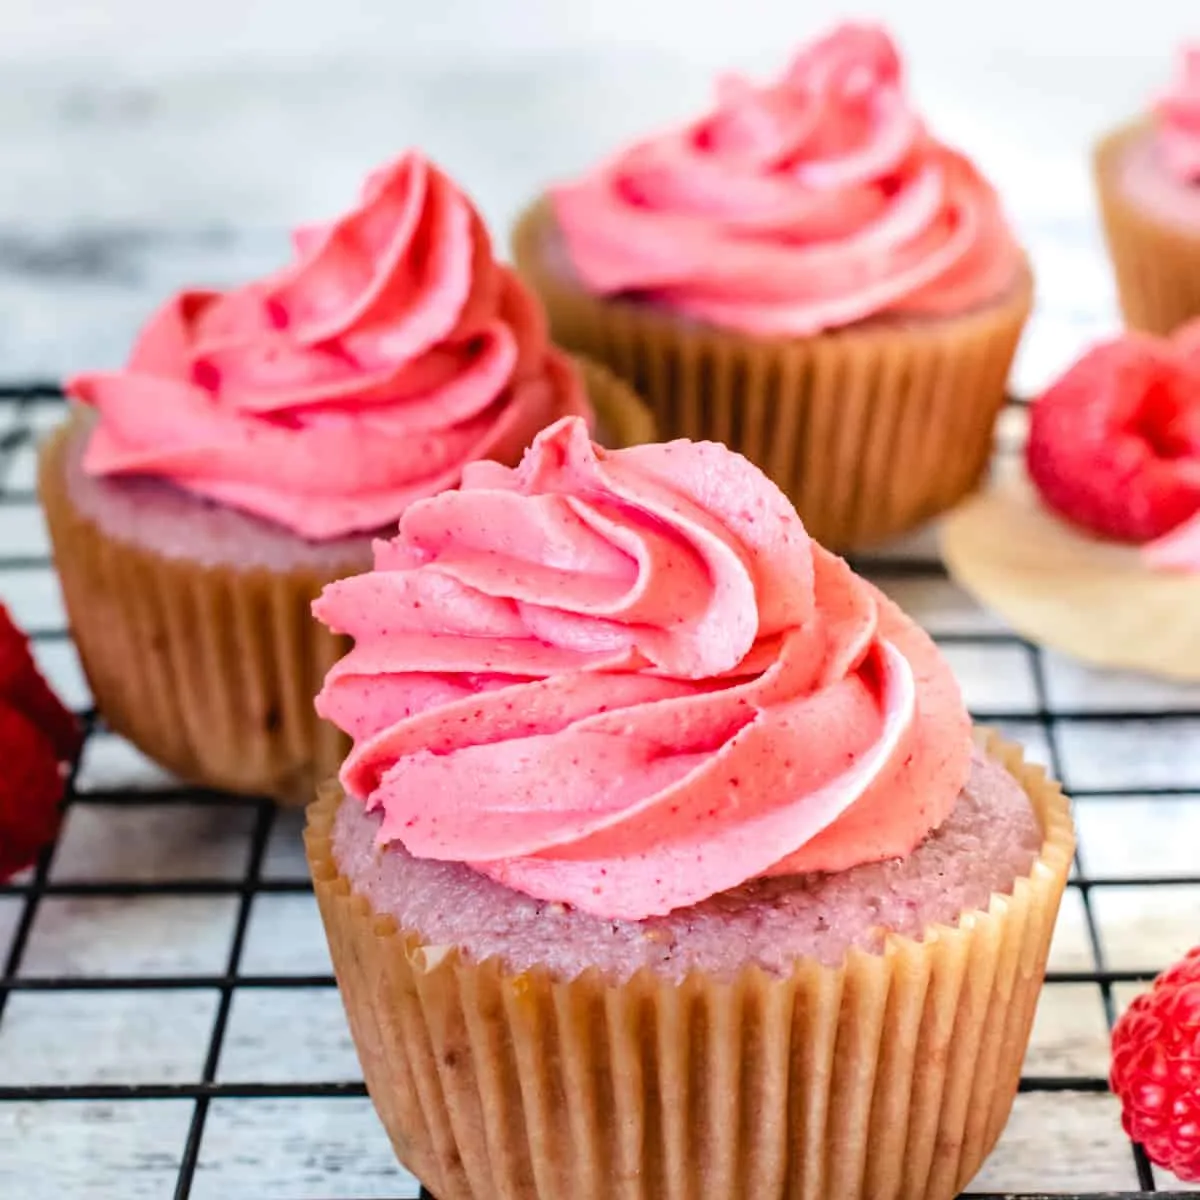 A pink cupcake with pink frosting surrounded by fresh raspberries.